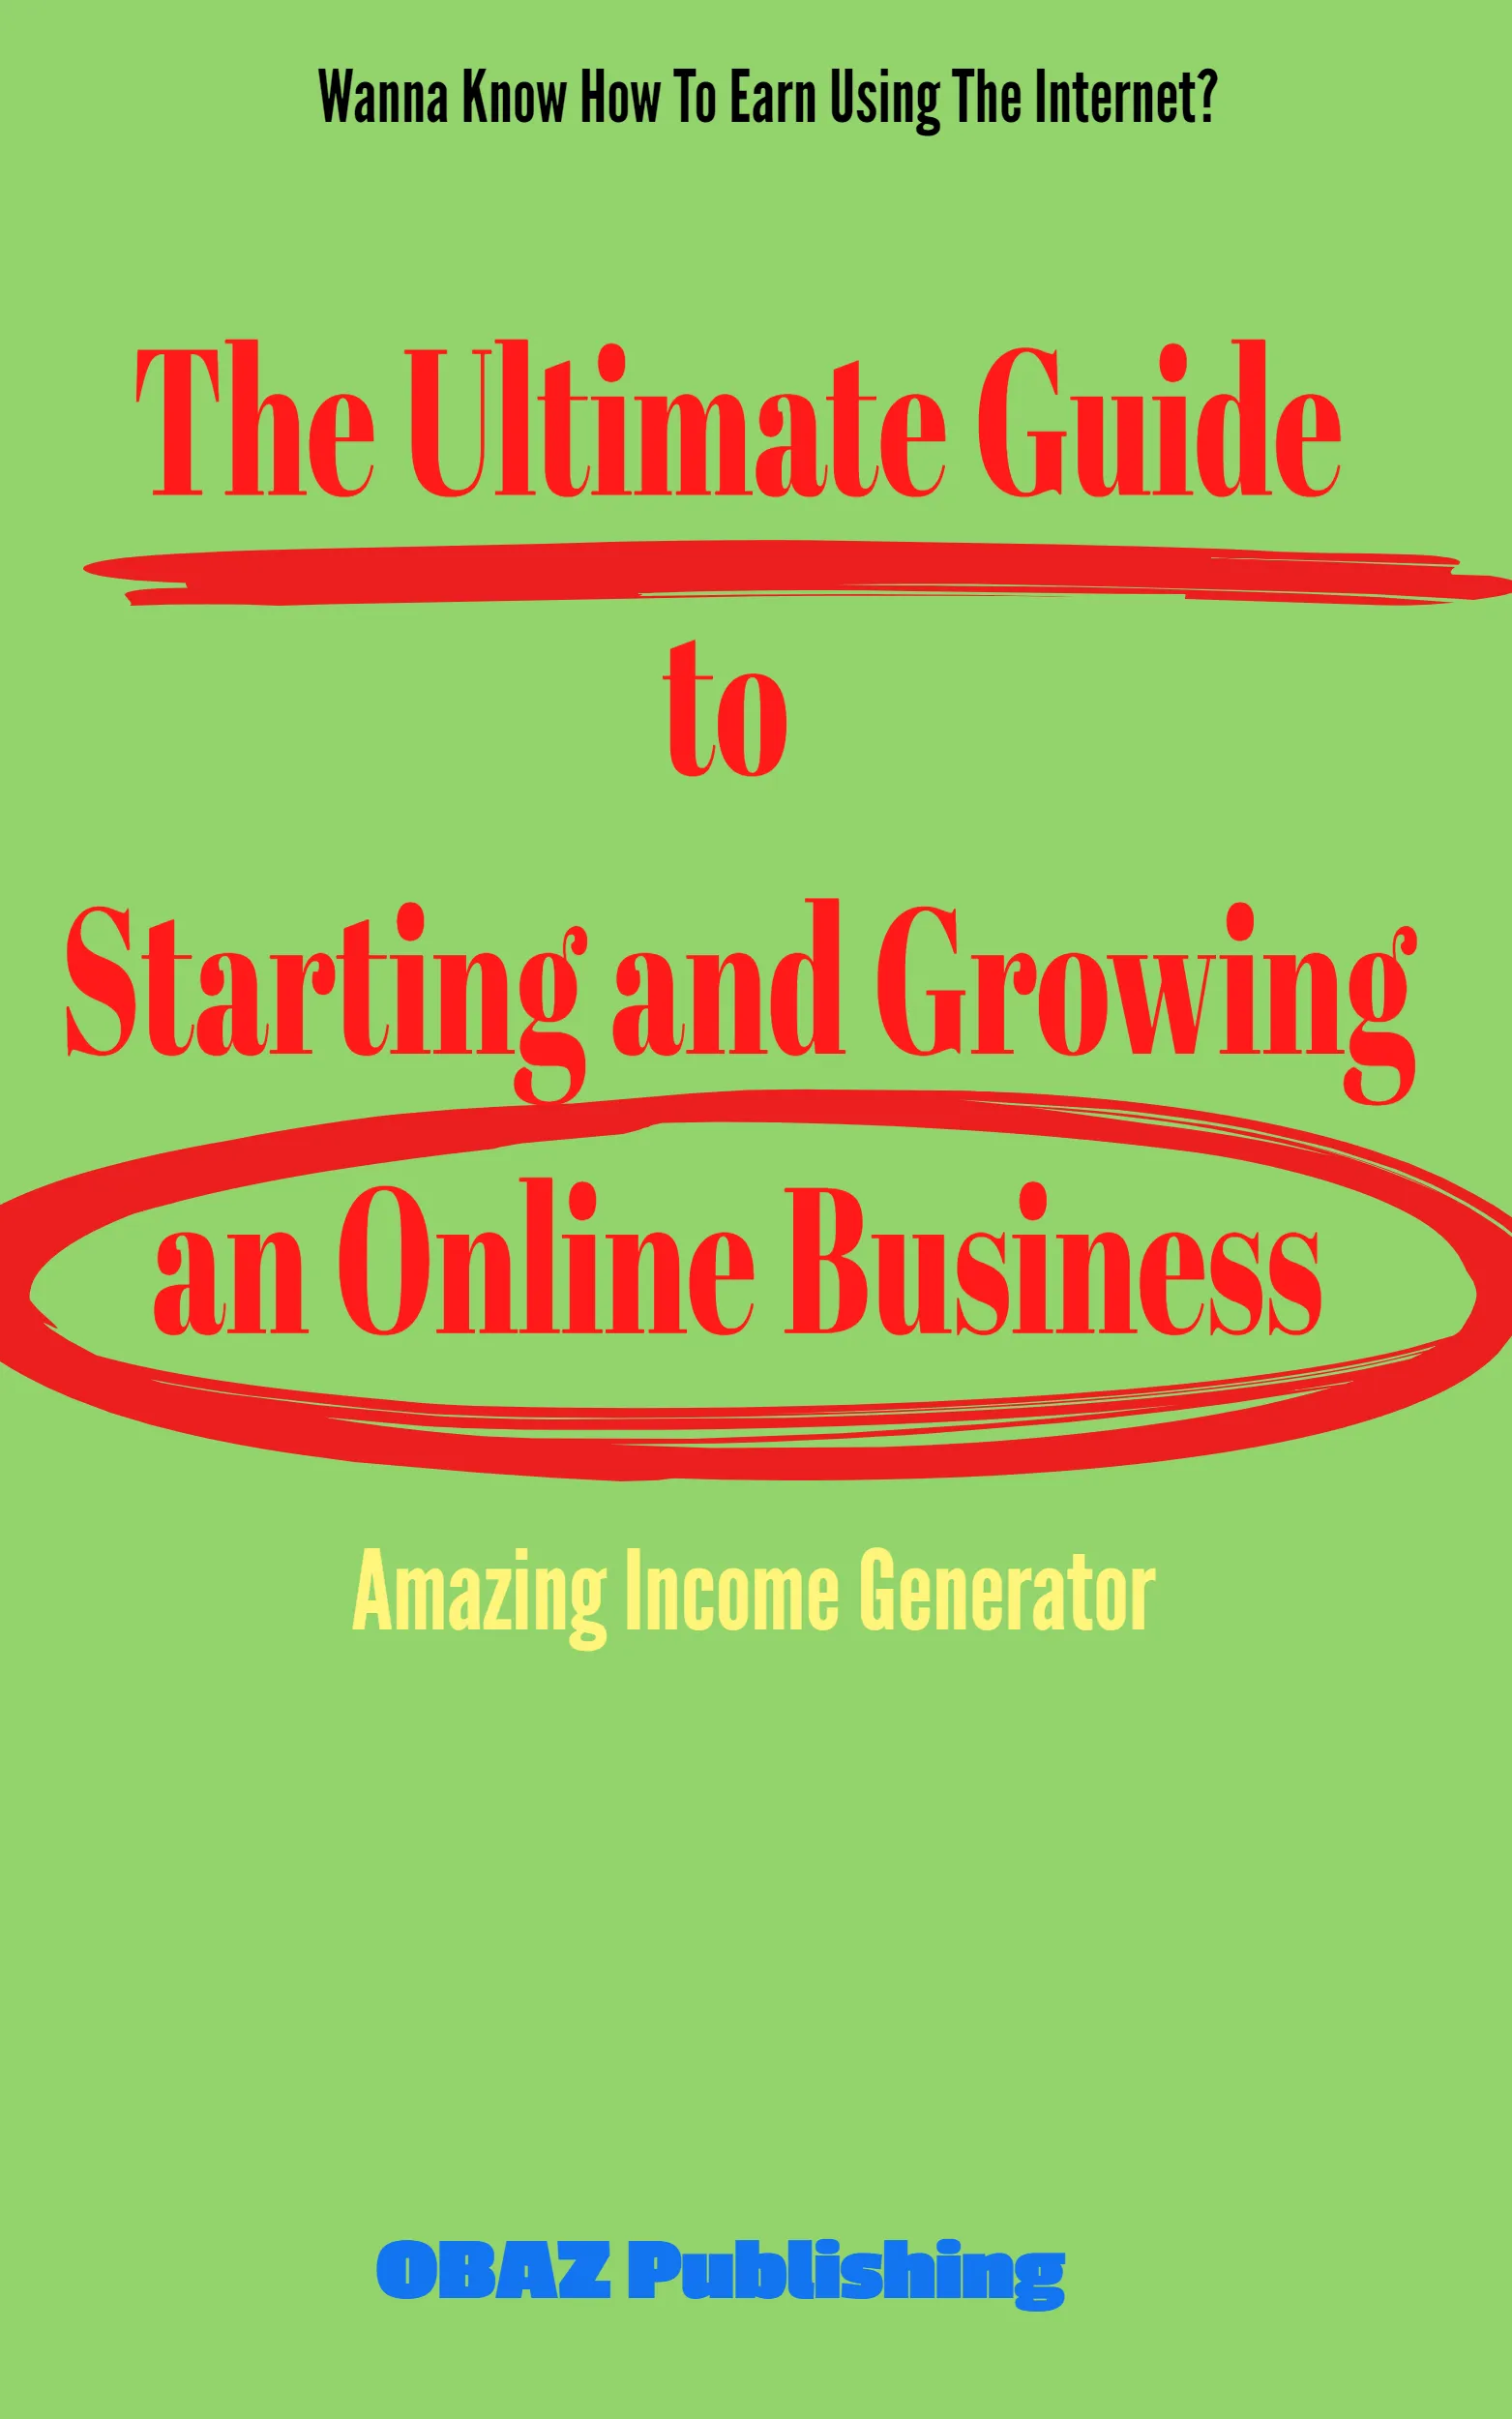 The Ultimate Guide to Starting and Growing an Online Business ecover